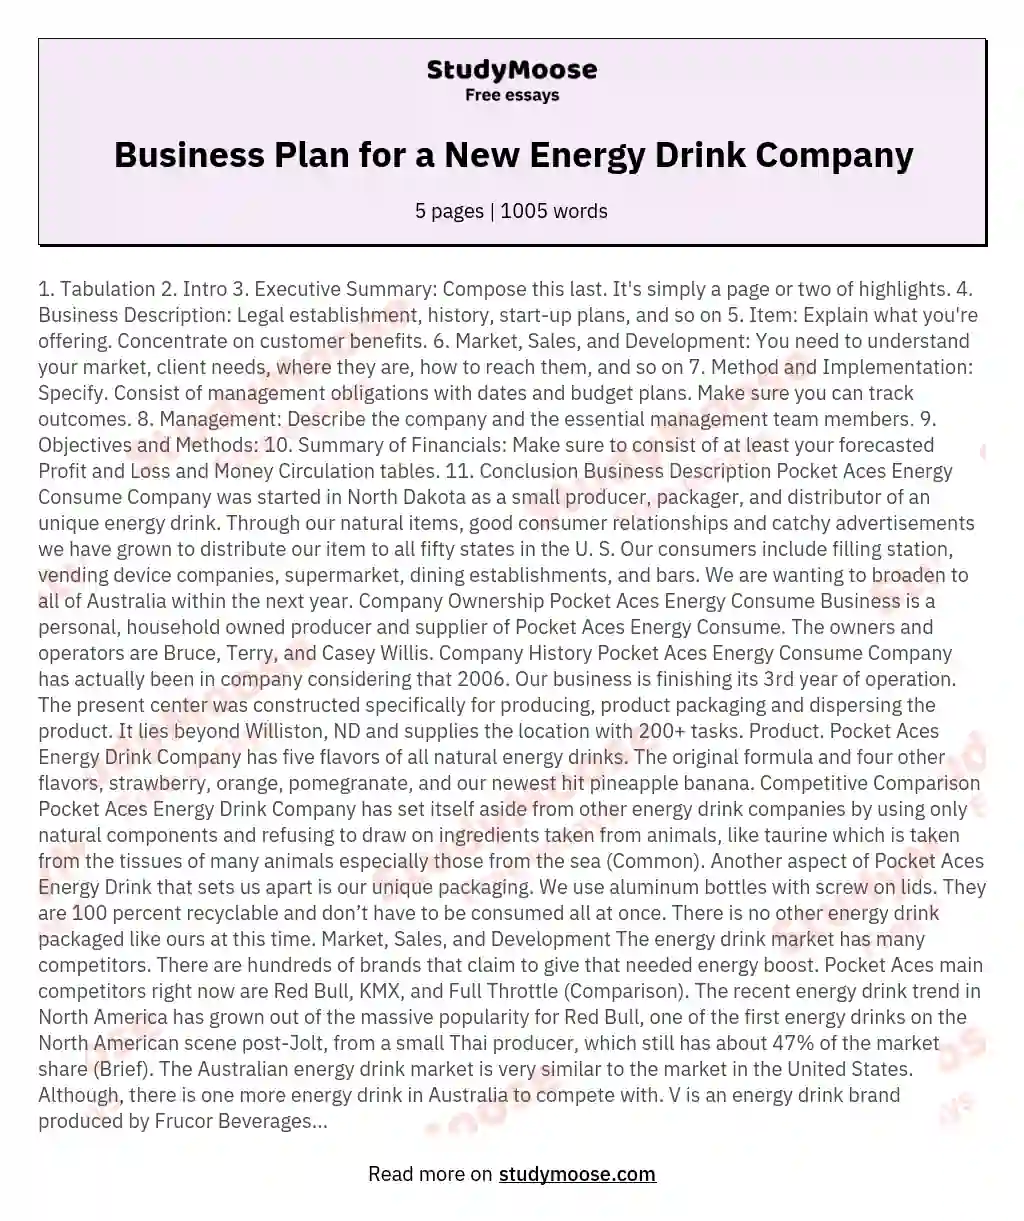 Business Plan for a New Energy Drink Company